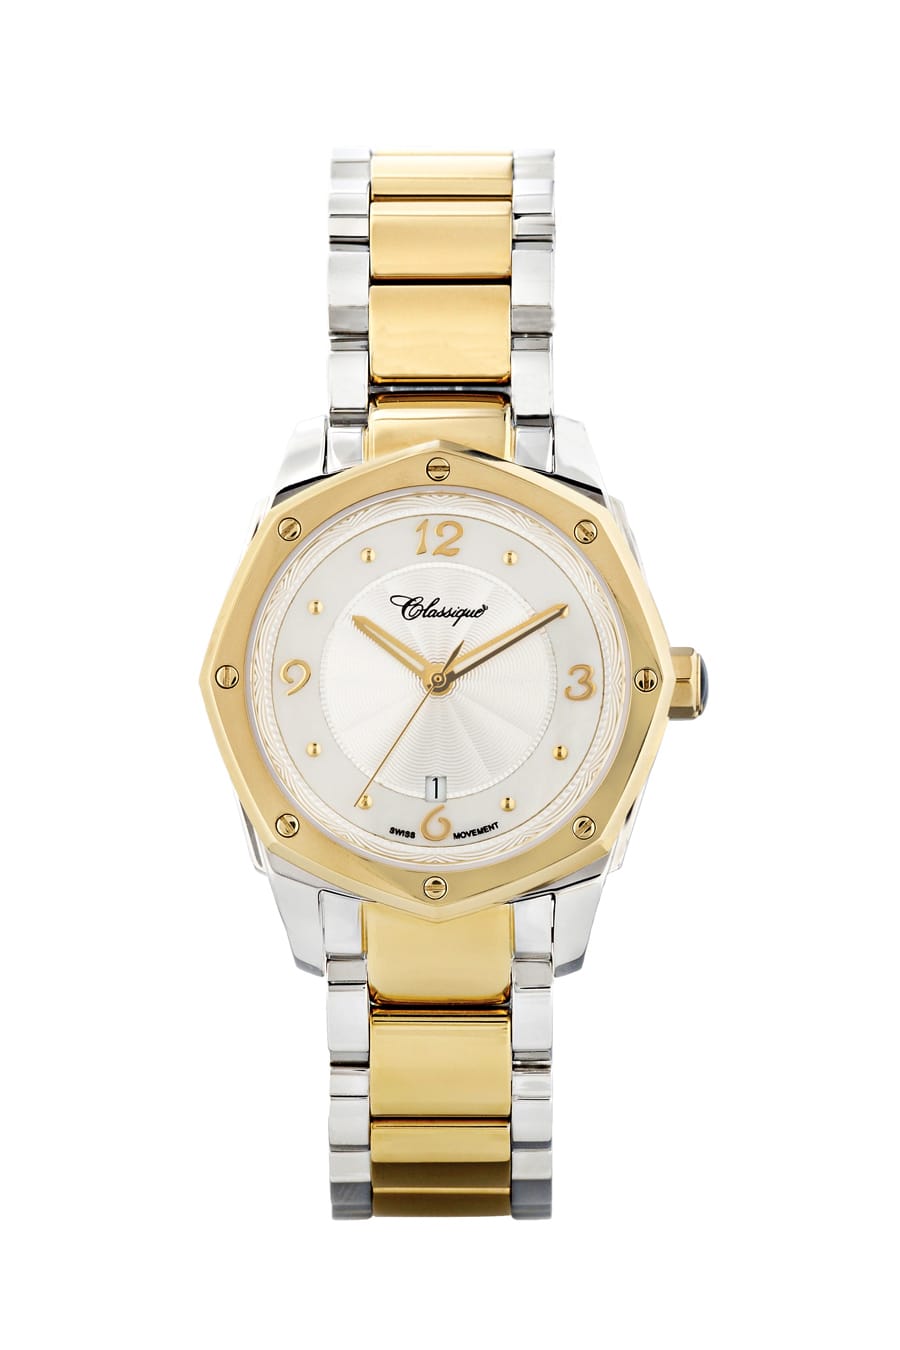 Two Tone Gold Plated And Stainless Steel 100m Swiss Quartz Watch available at LeGassick Diamonds and Jewellery Gold Coast, Australia.